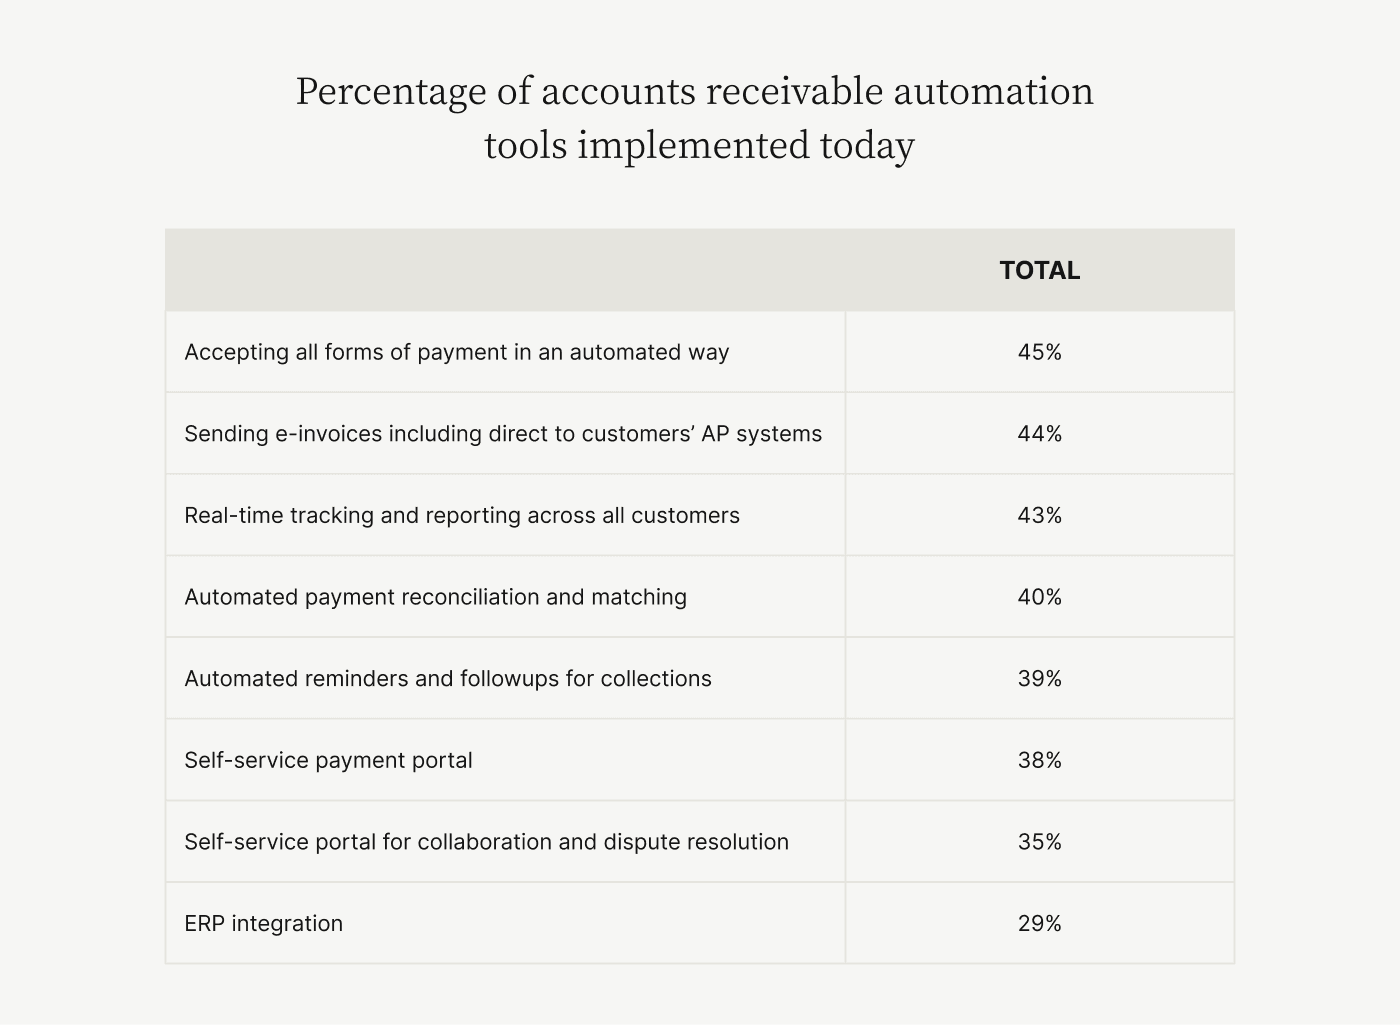 Percentage of accounts receivable automation tools implemented today